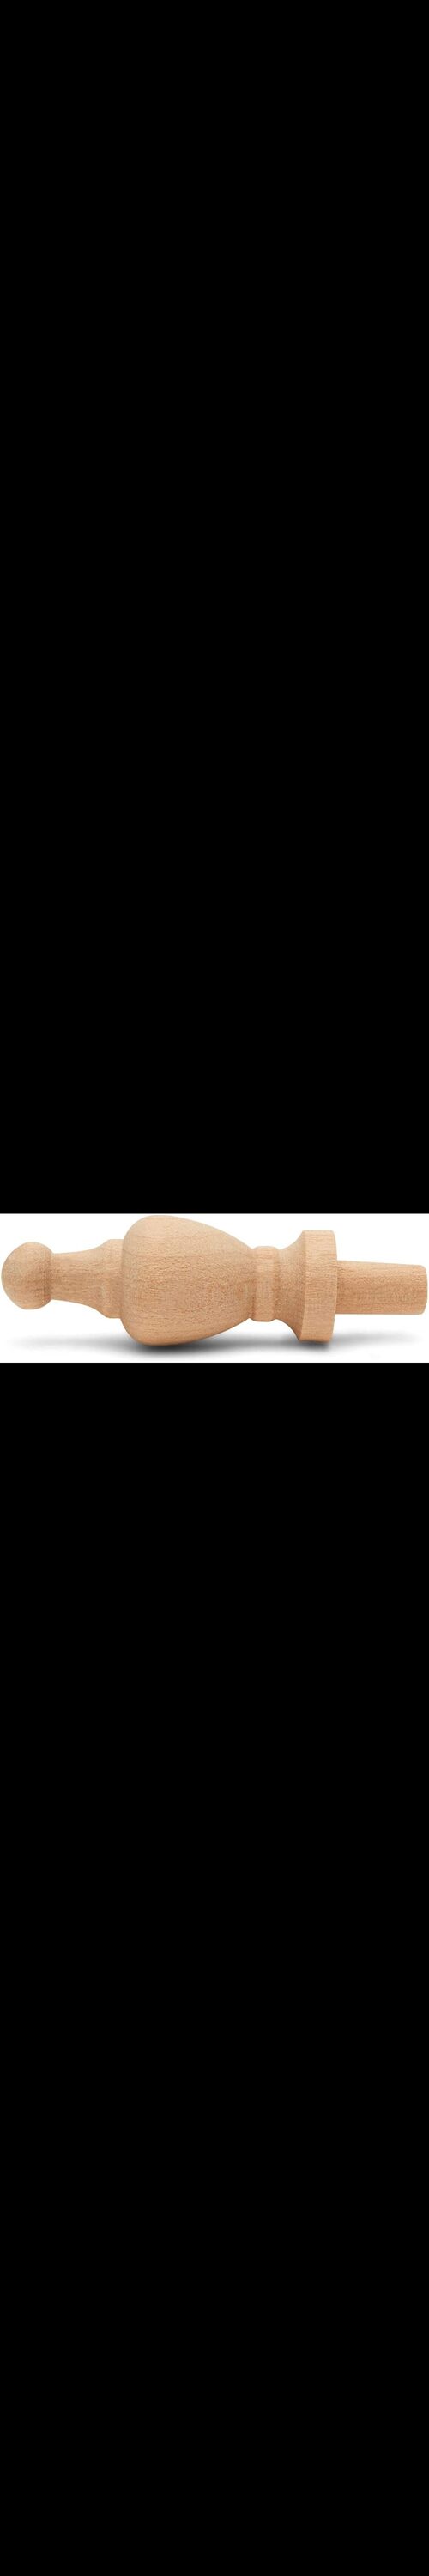 Small Wood Finials, 1-1/2 inch Wooden Finials for Crafting, DIY Décor, and  Wooden Finial Crafts, Pack of 12, by Woodpeckers